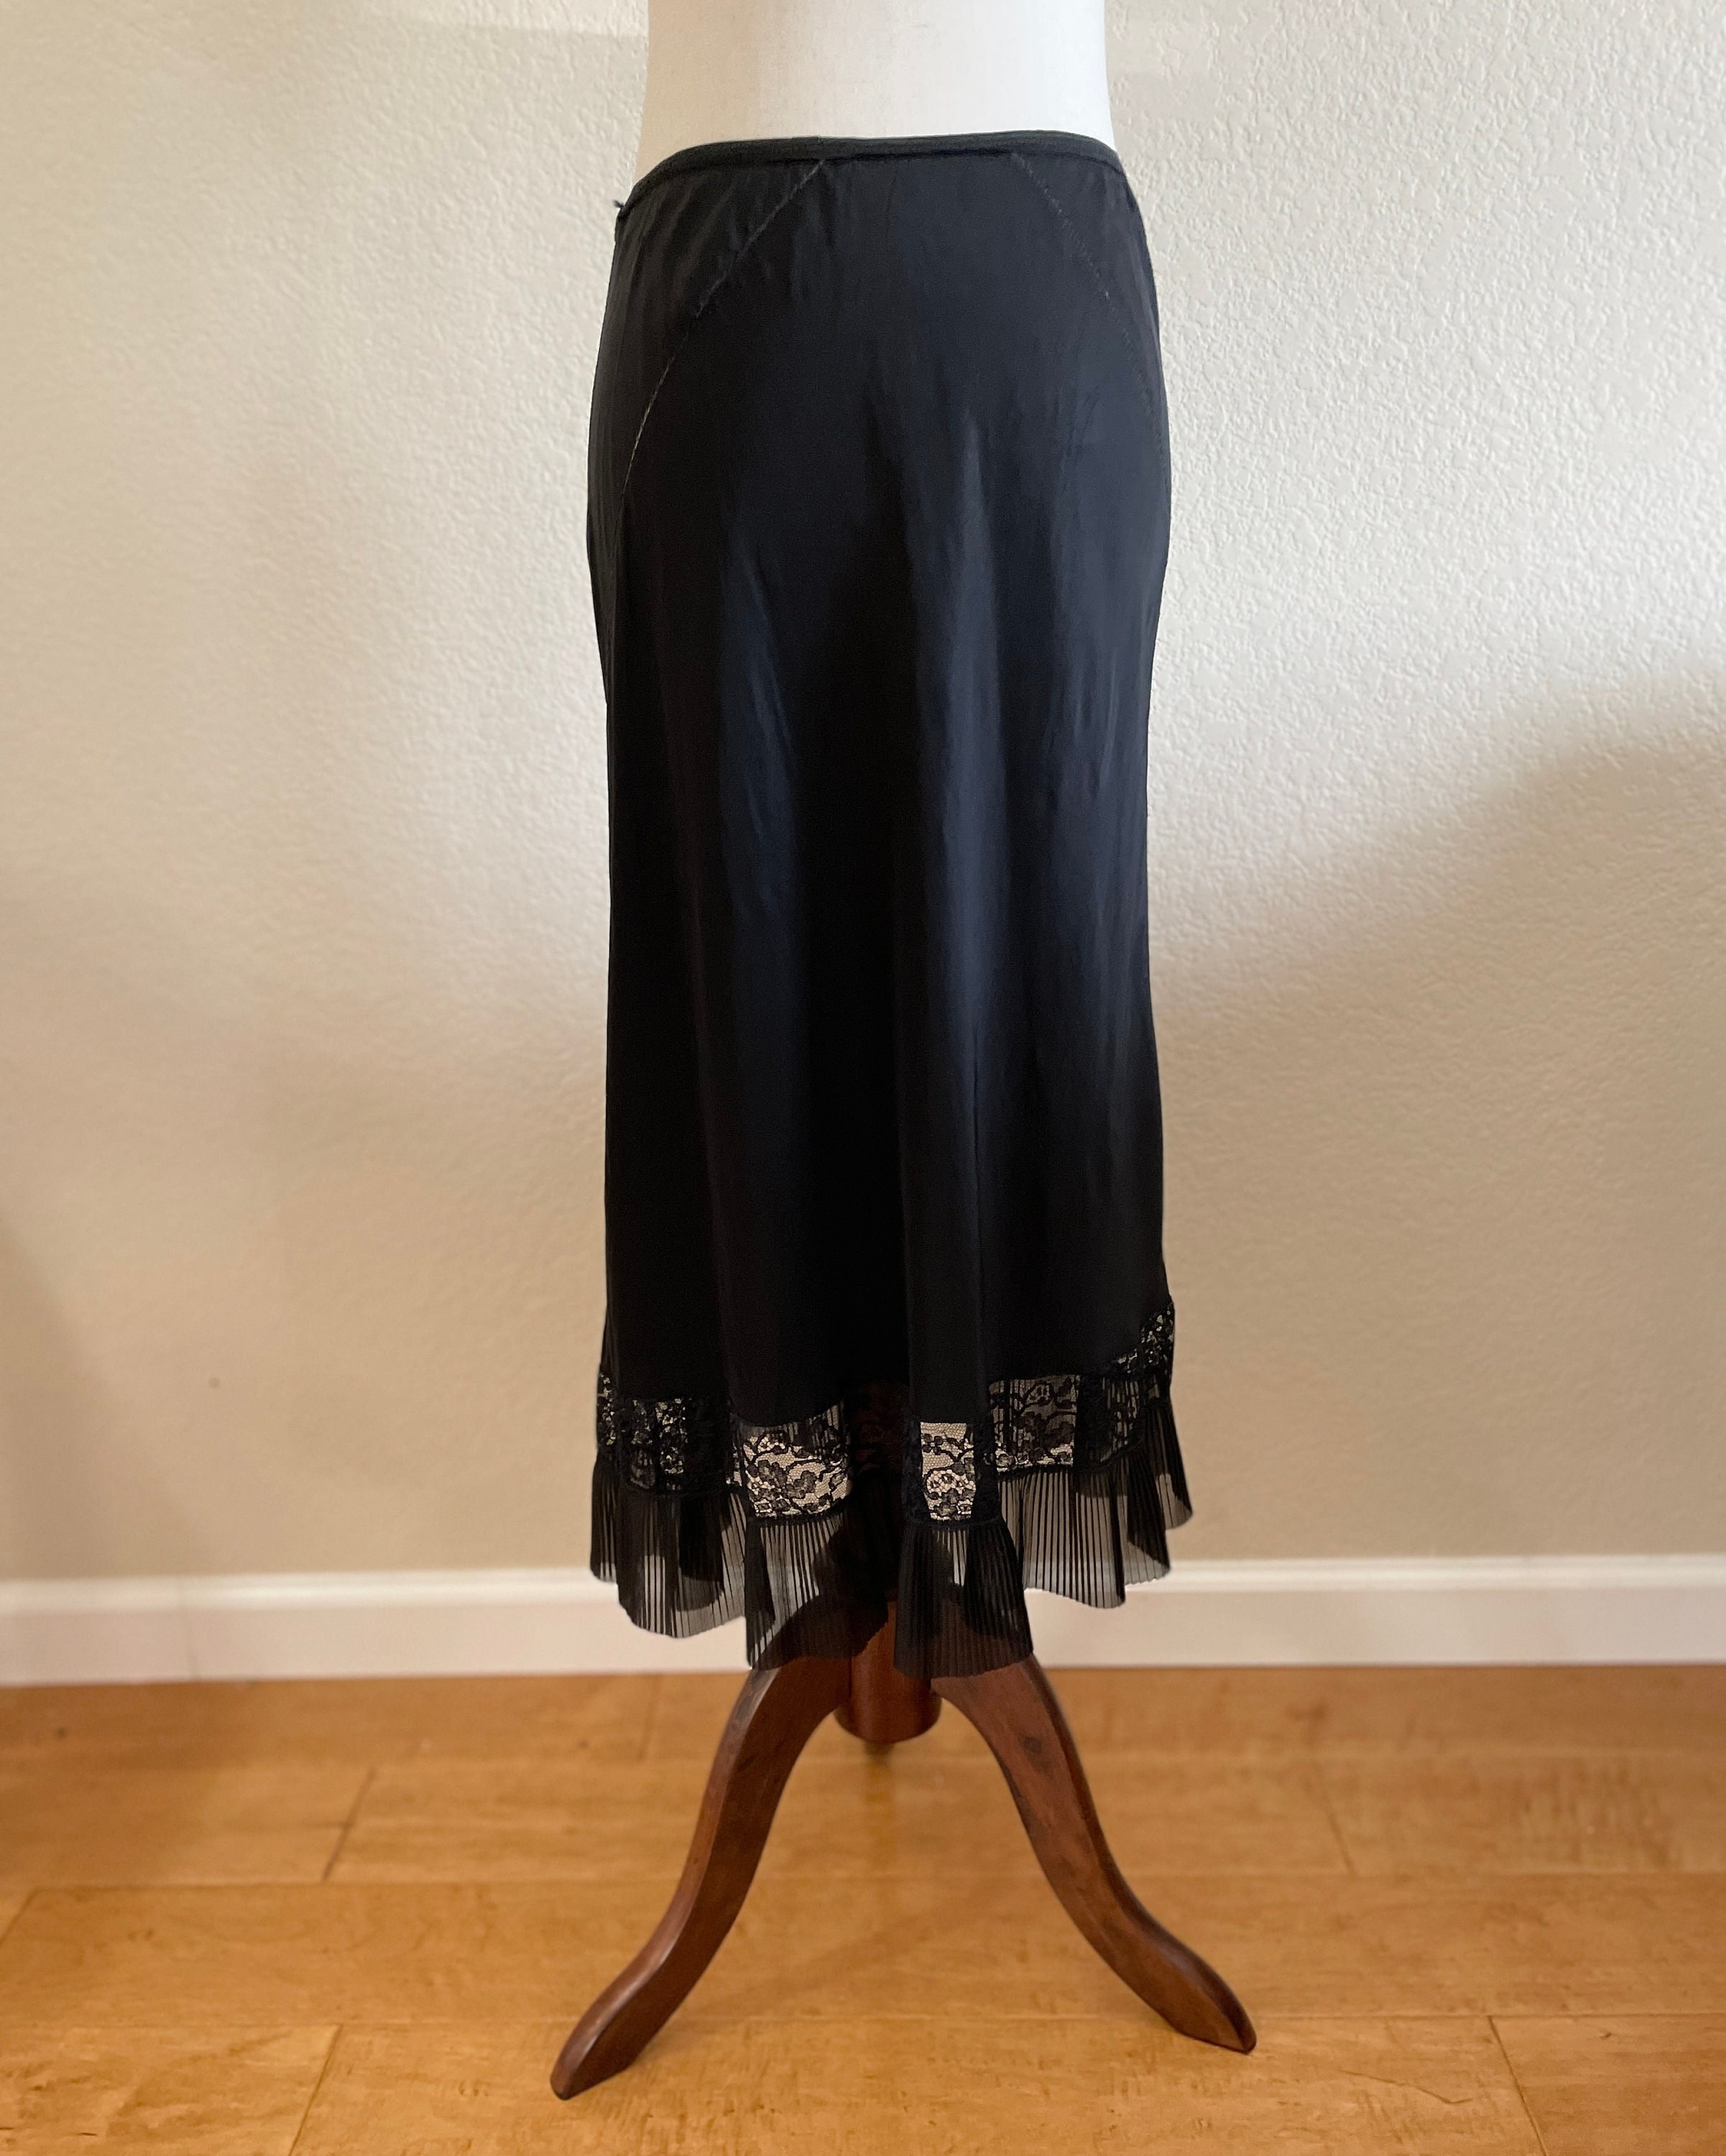 Vintage 1950s Black Midi Half Slip With Lace and Pleated Trim size M 